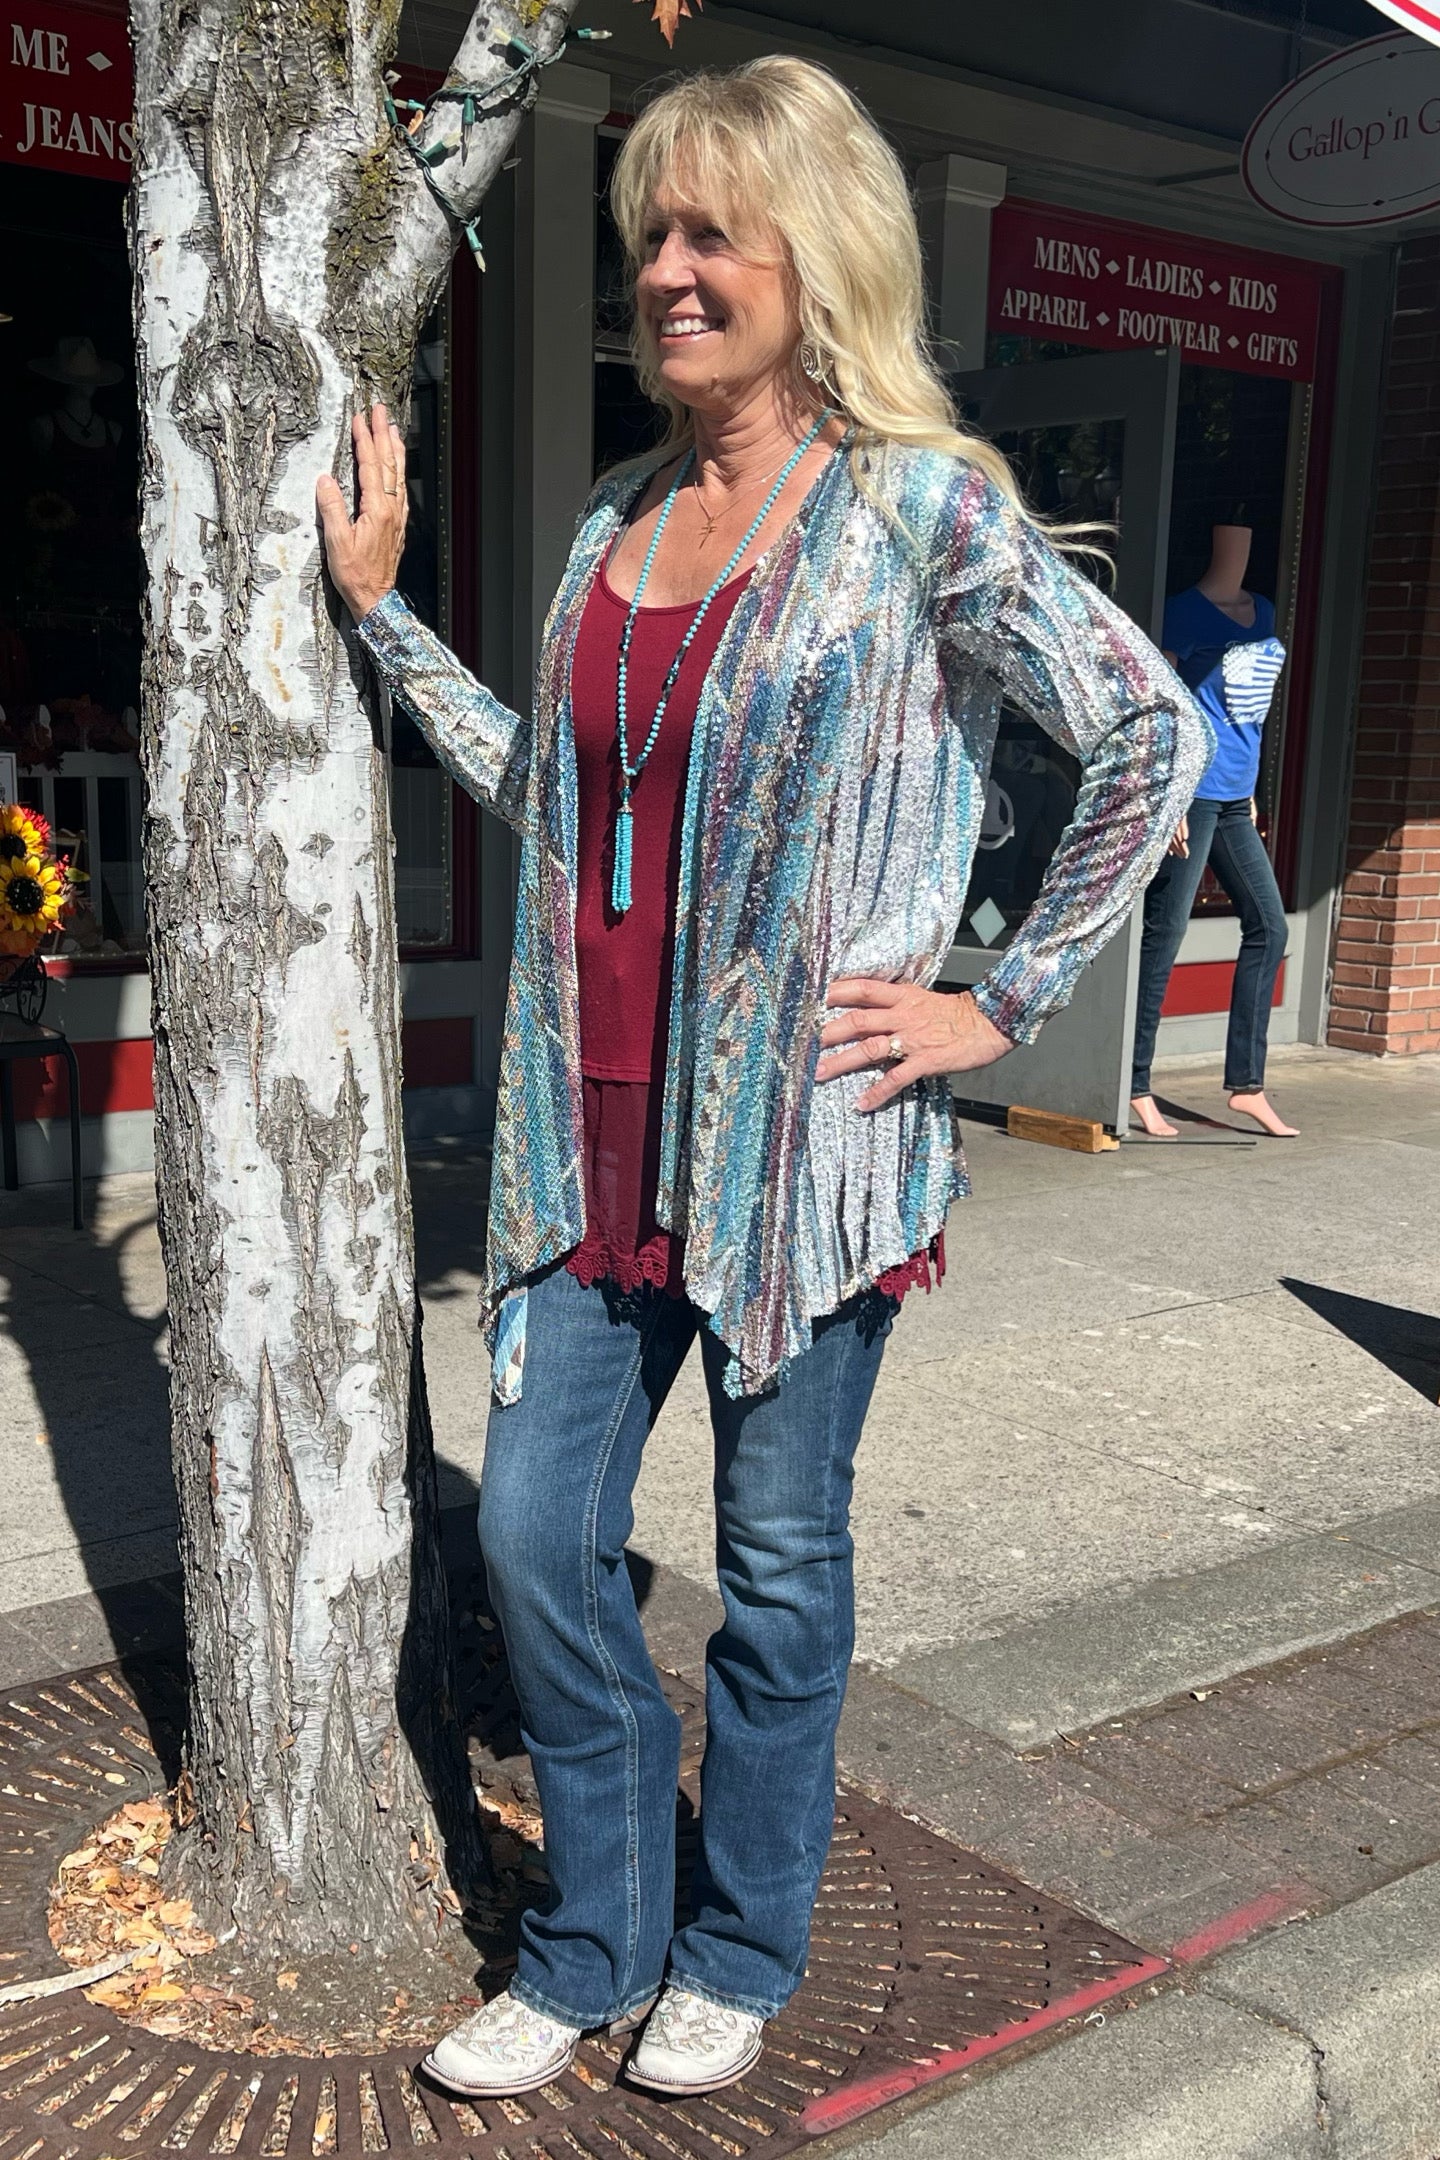 Full Sequin Turquoise Aztec Cardigan by Origami-Cardigan-Origami-Gallop 'n Glitz- Women's Western Wear Boutique, Located in Grants Pass, Oregon